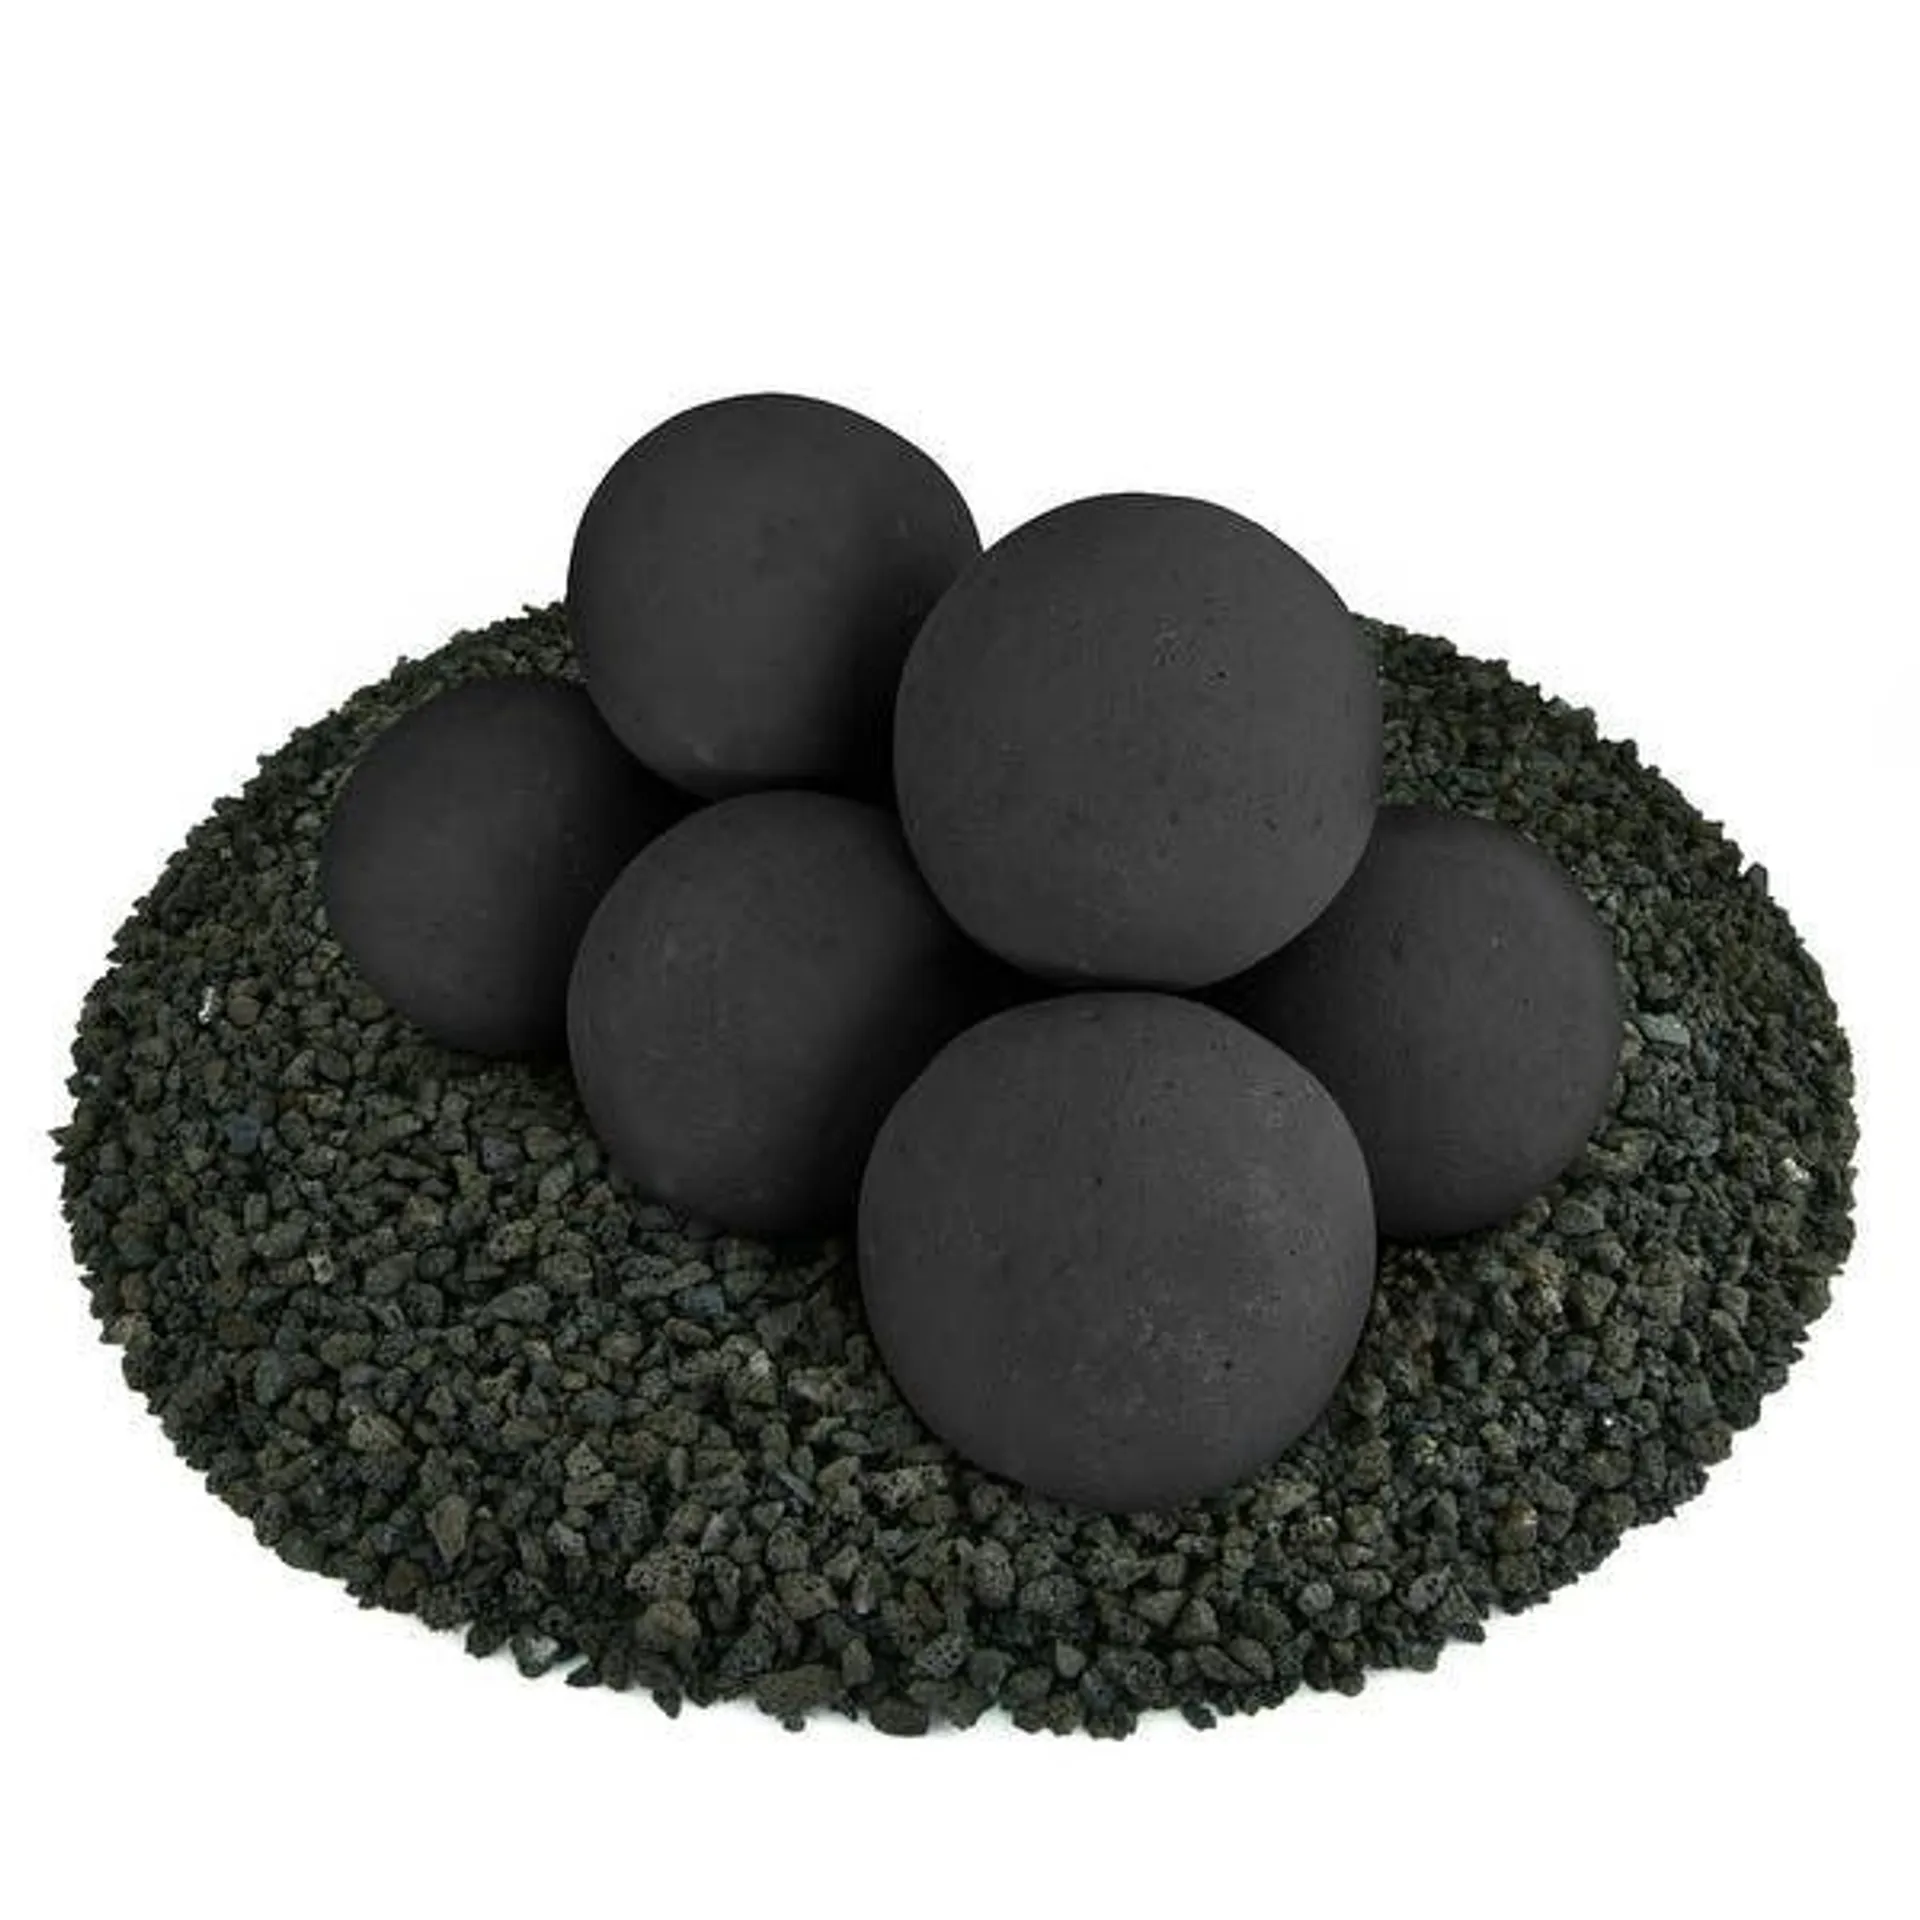 Ceramic Fire Balls for Indoor/ Outdoor Fire Pits or Fireplaces